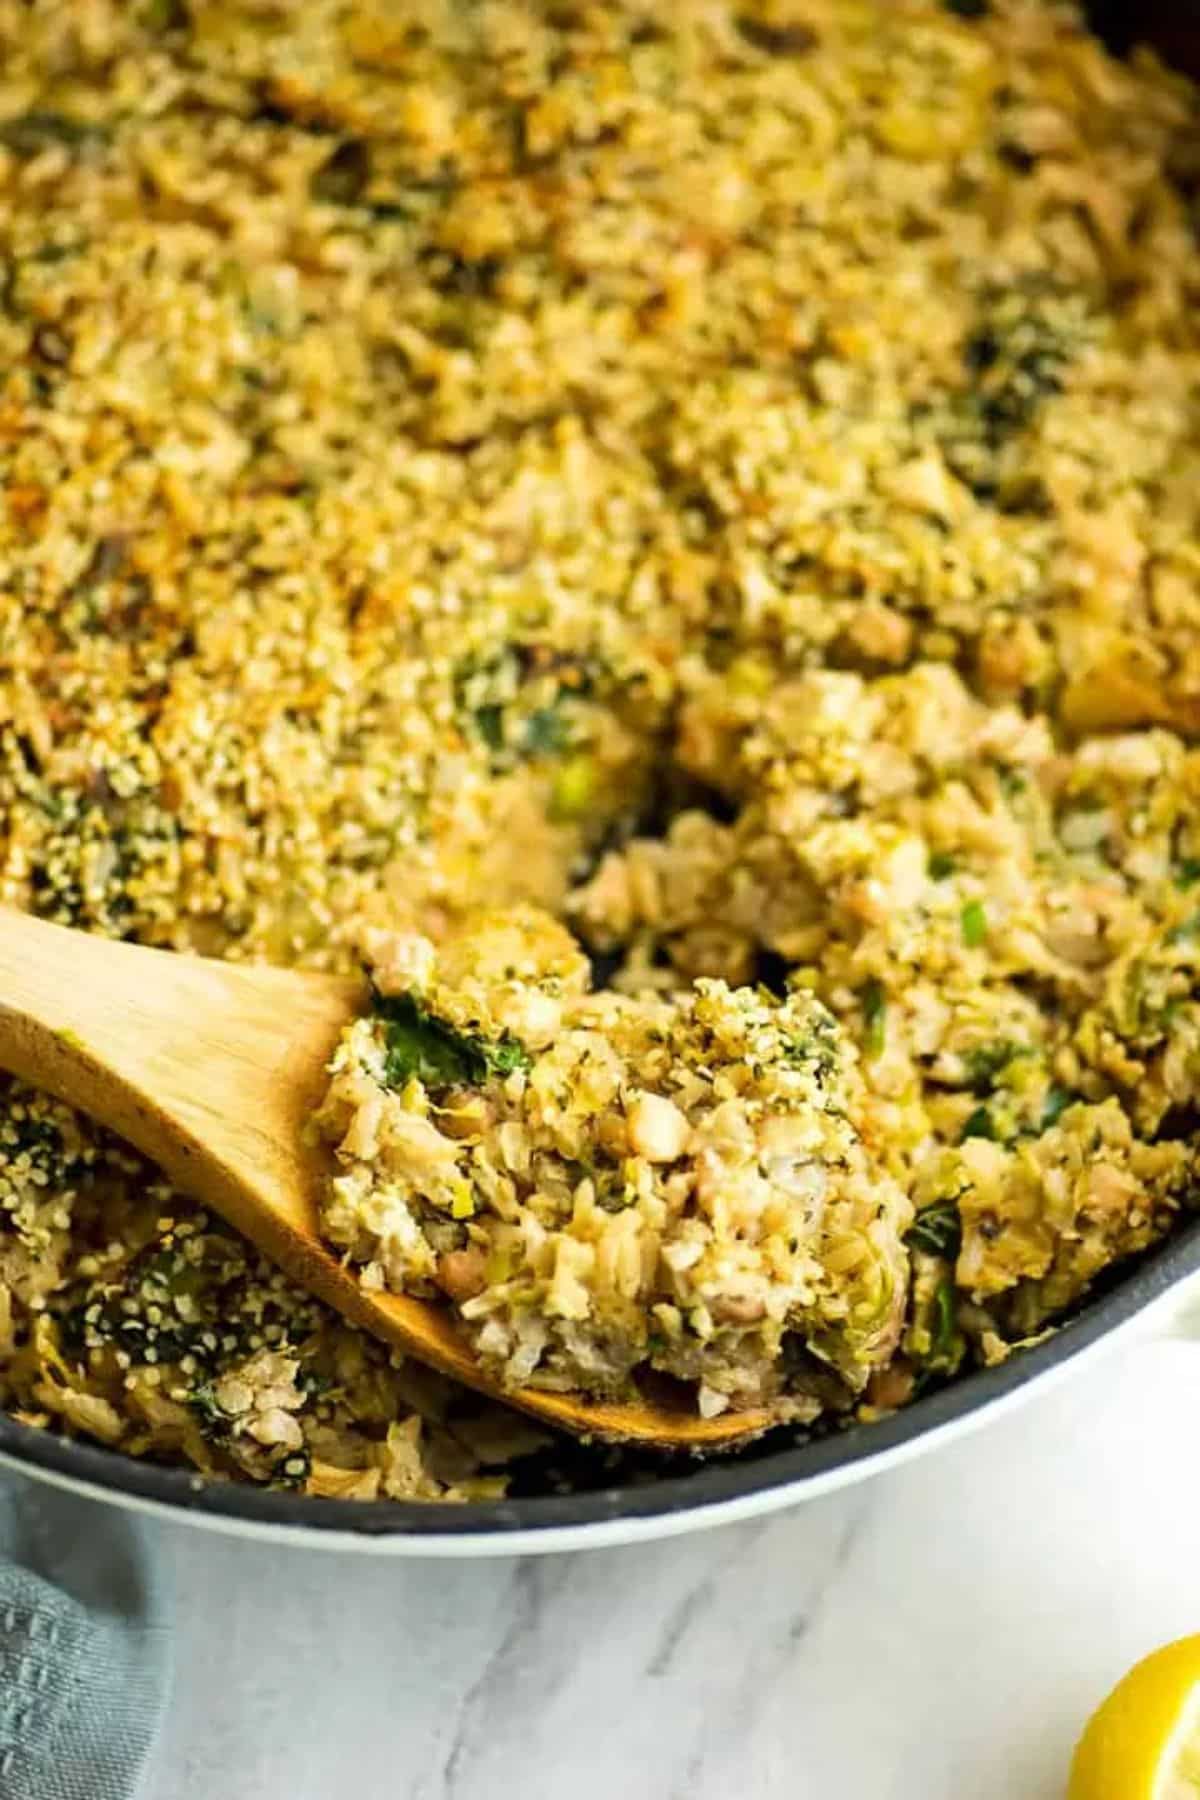 Vegan Brussel Sprout in a casserole with a wooden spoon.